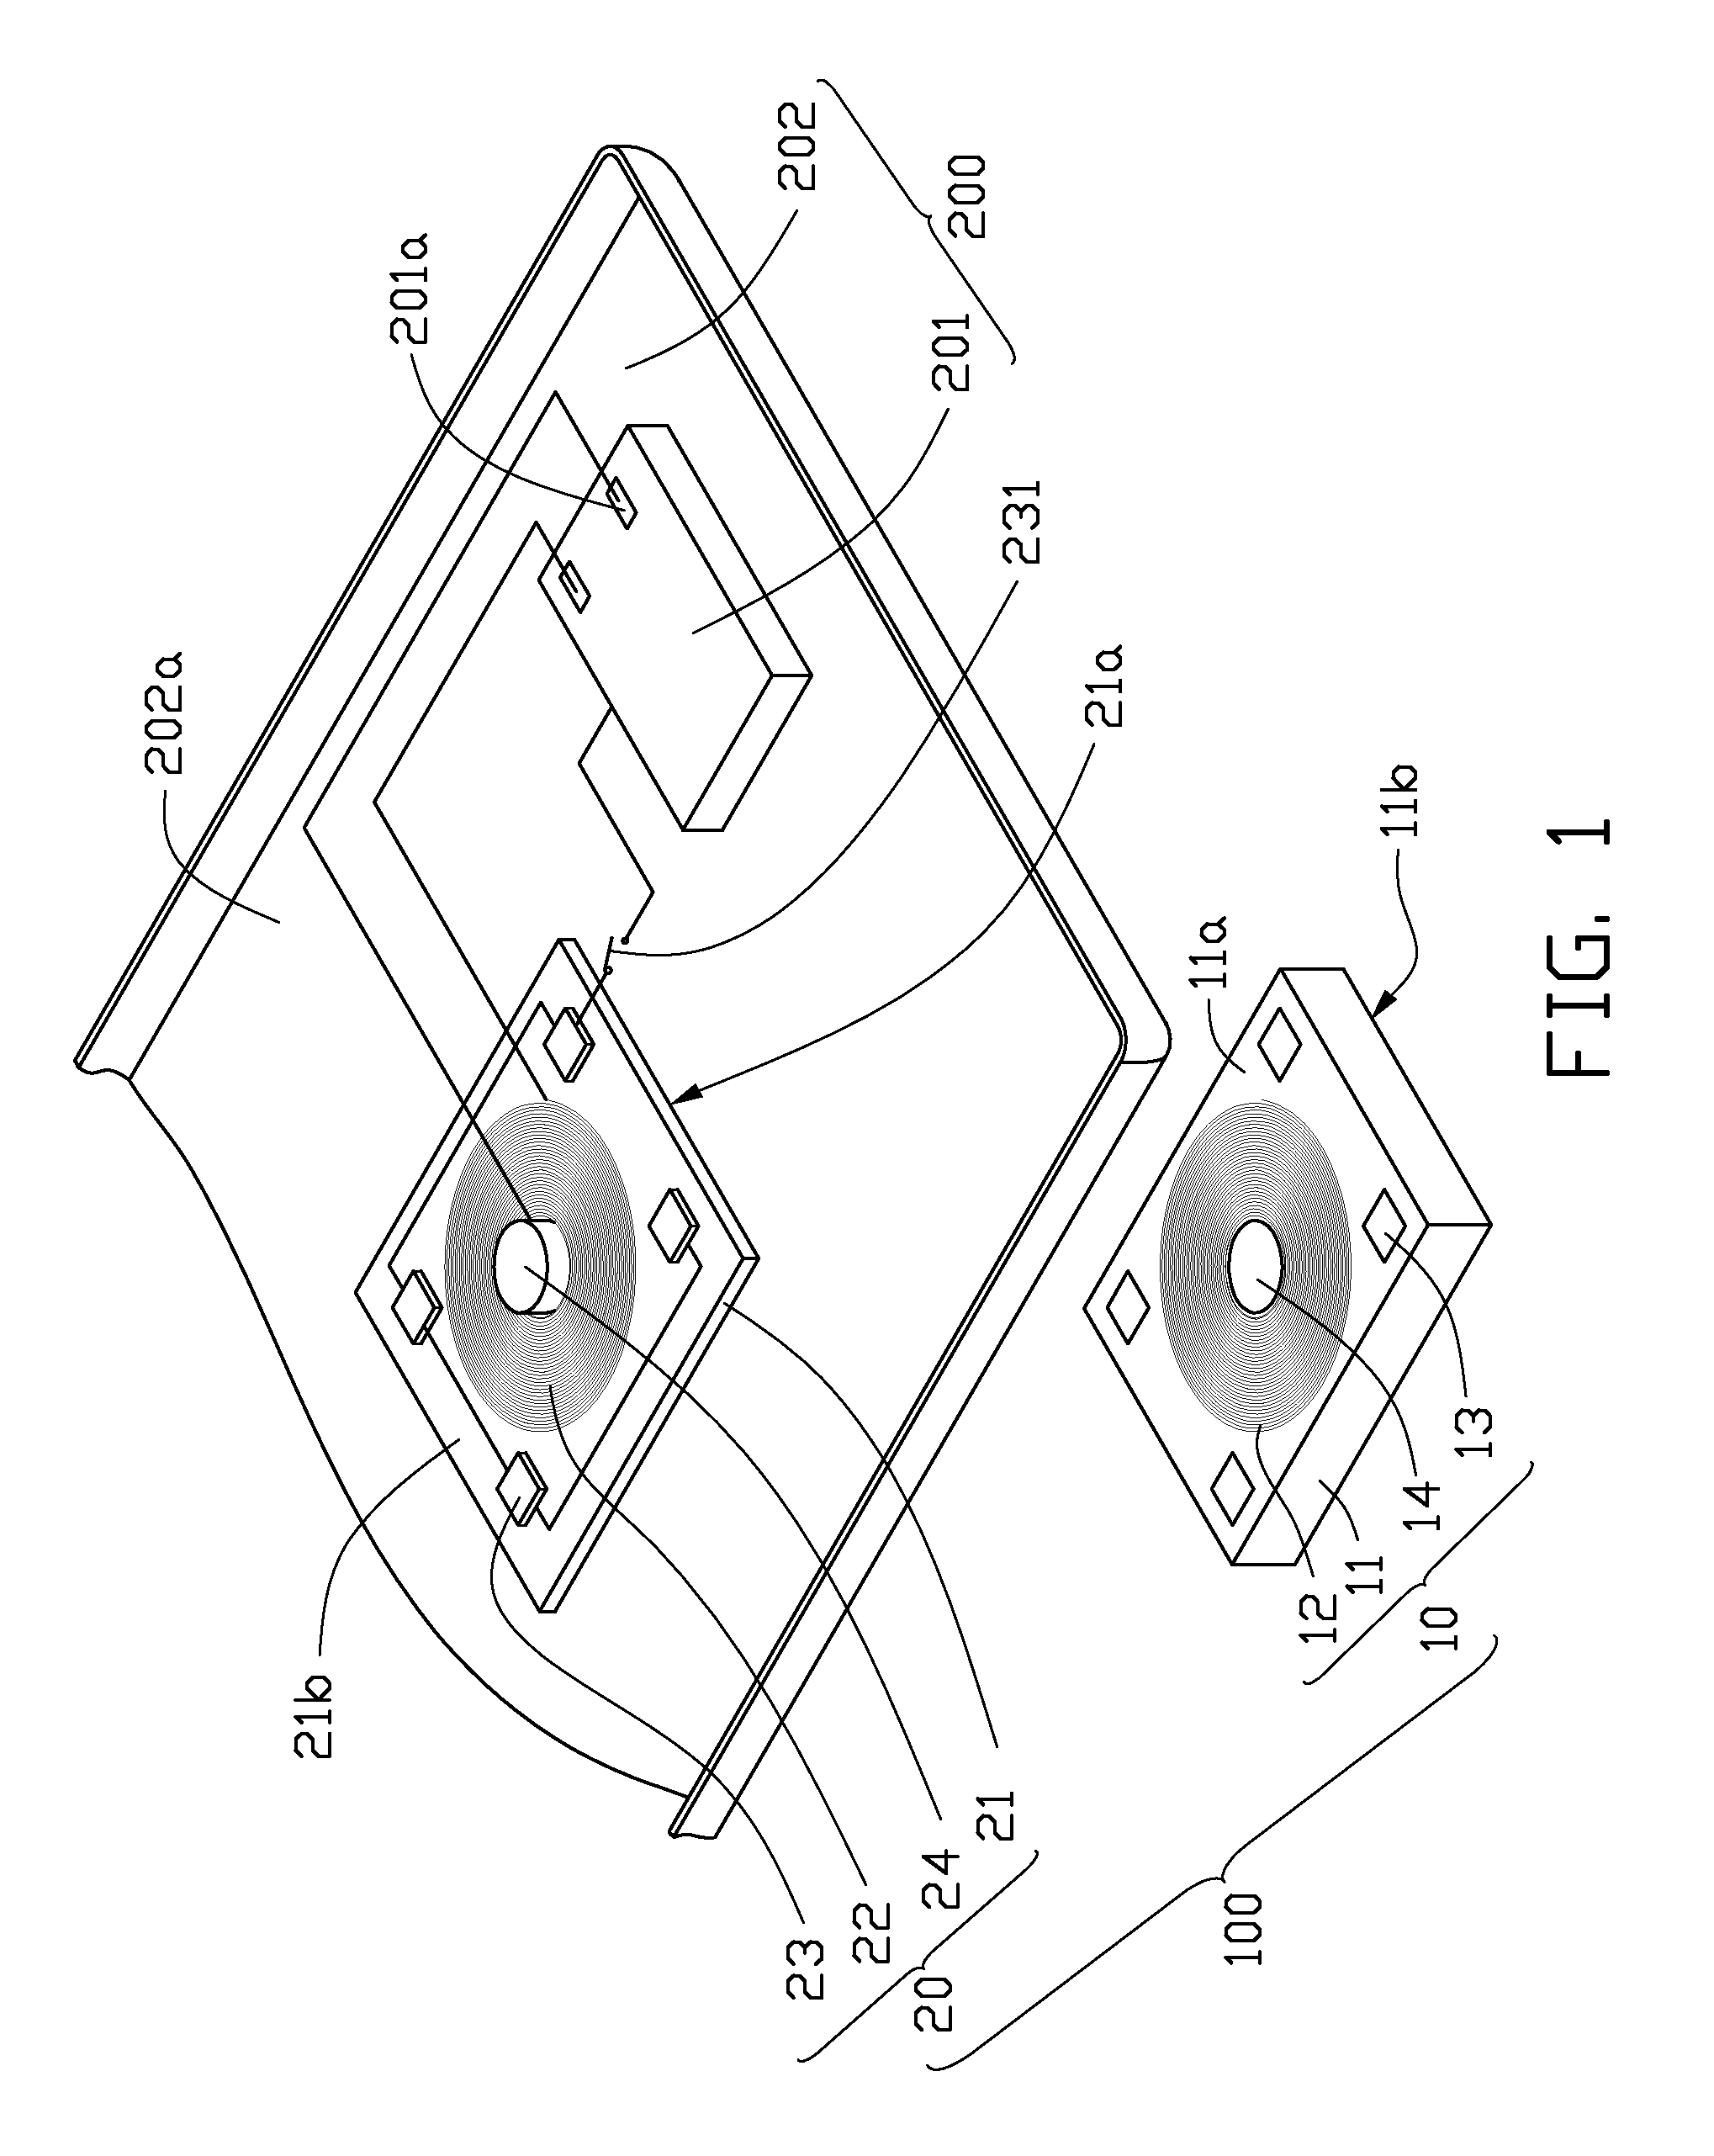 Recharging system and electronic device